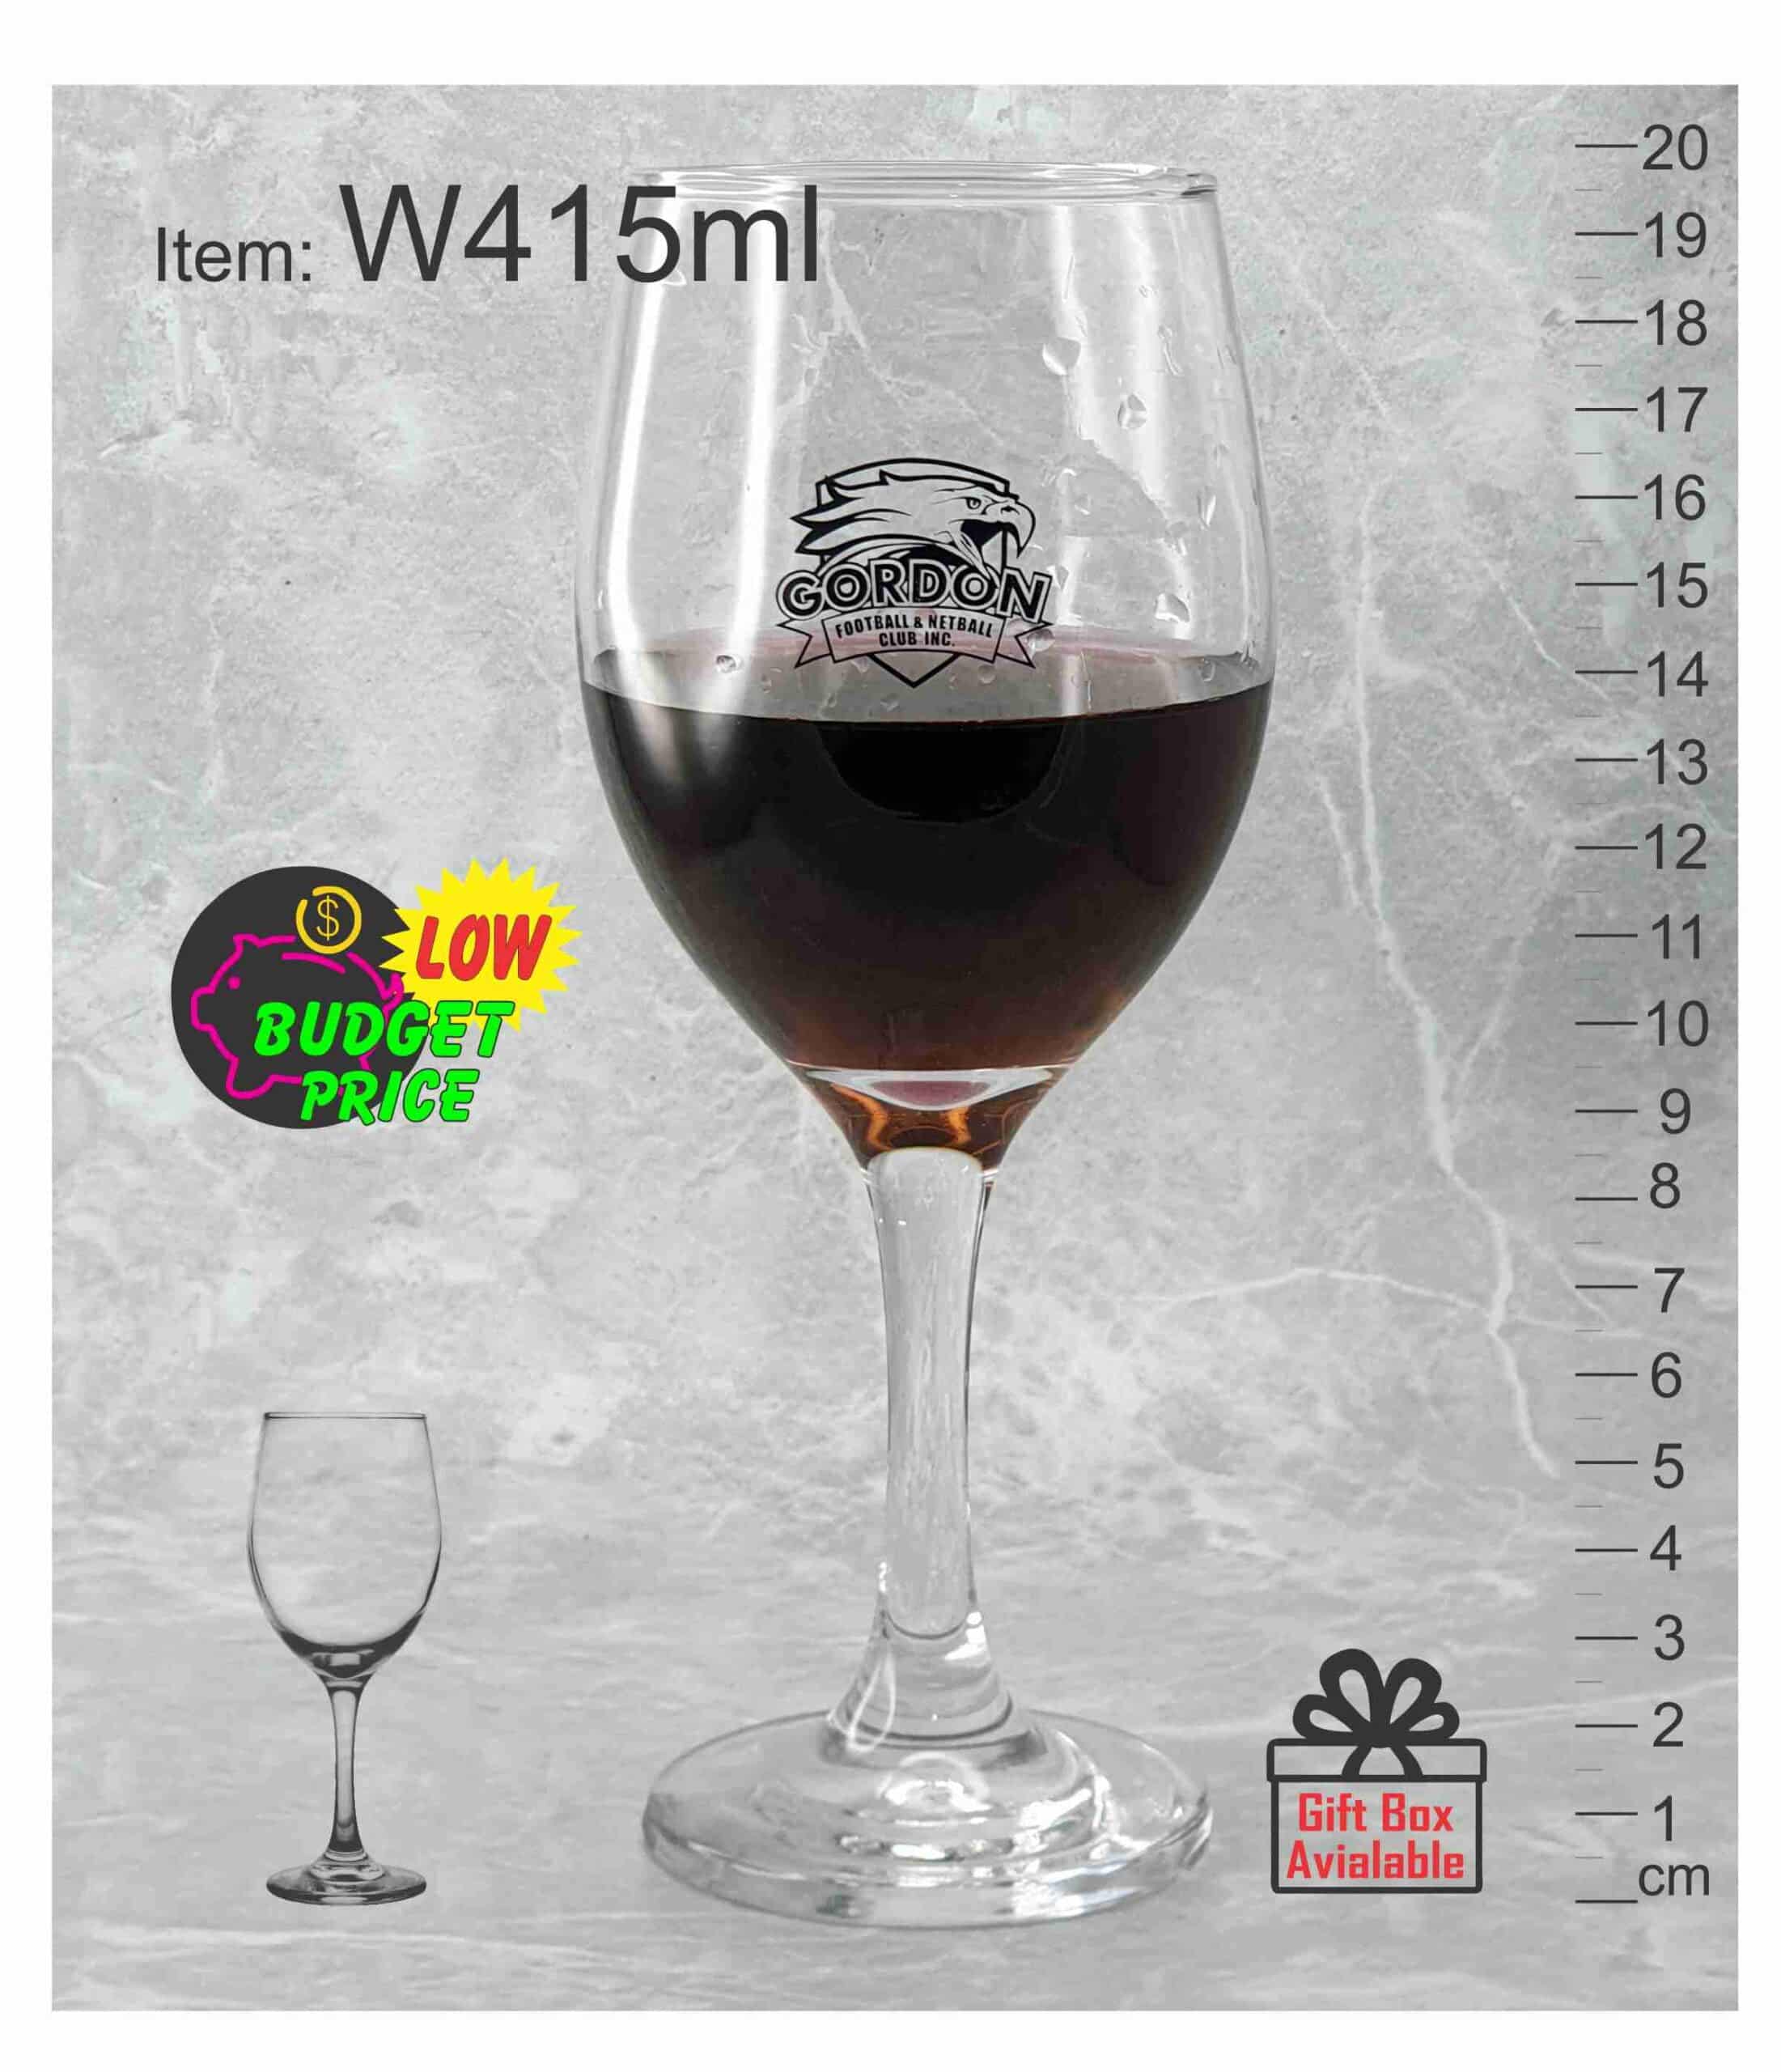 W415ml black logo printed red wine low cost cheap cup universal glass event festival Australia abc2000 Buy Online scaled